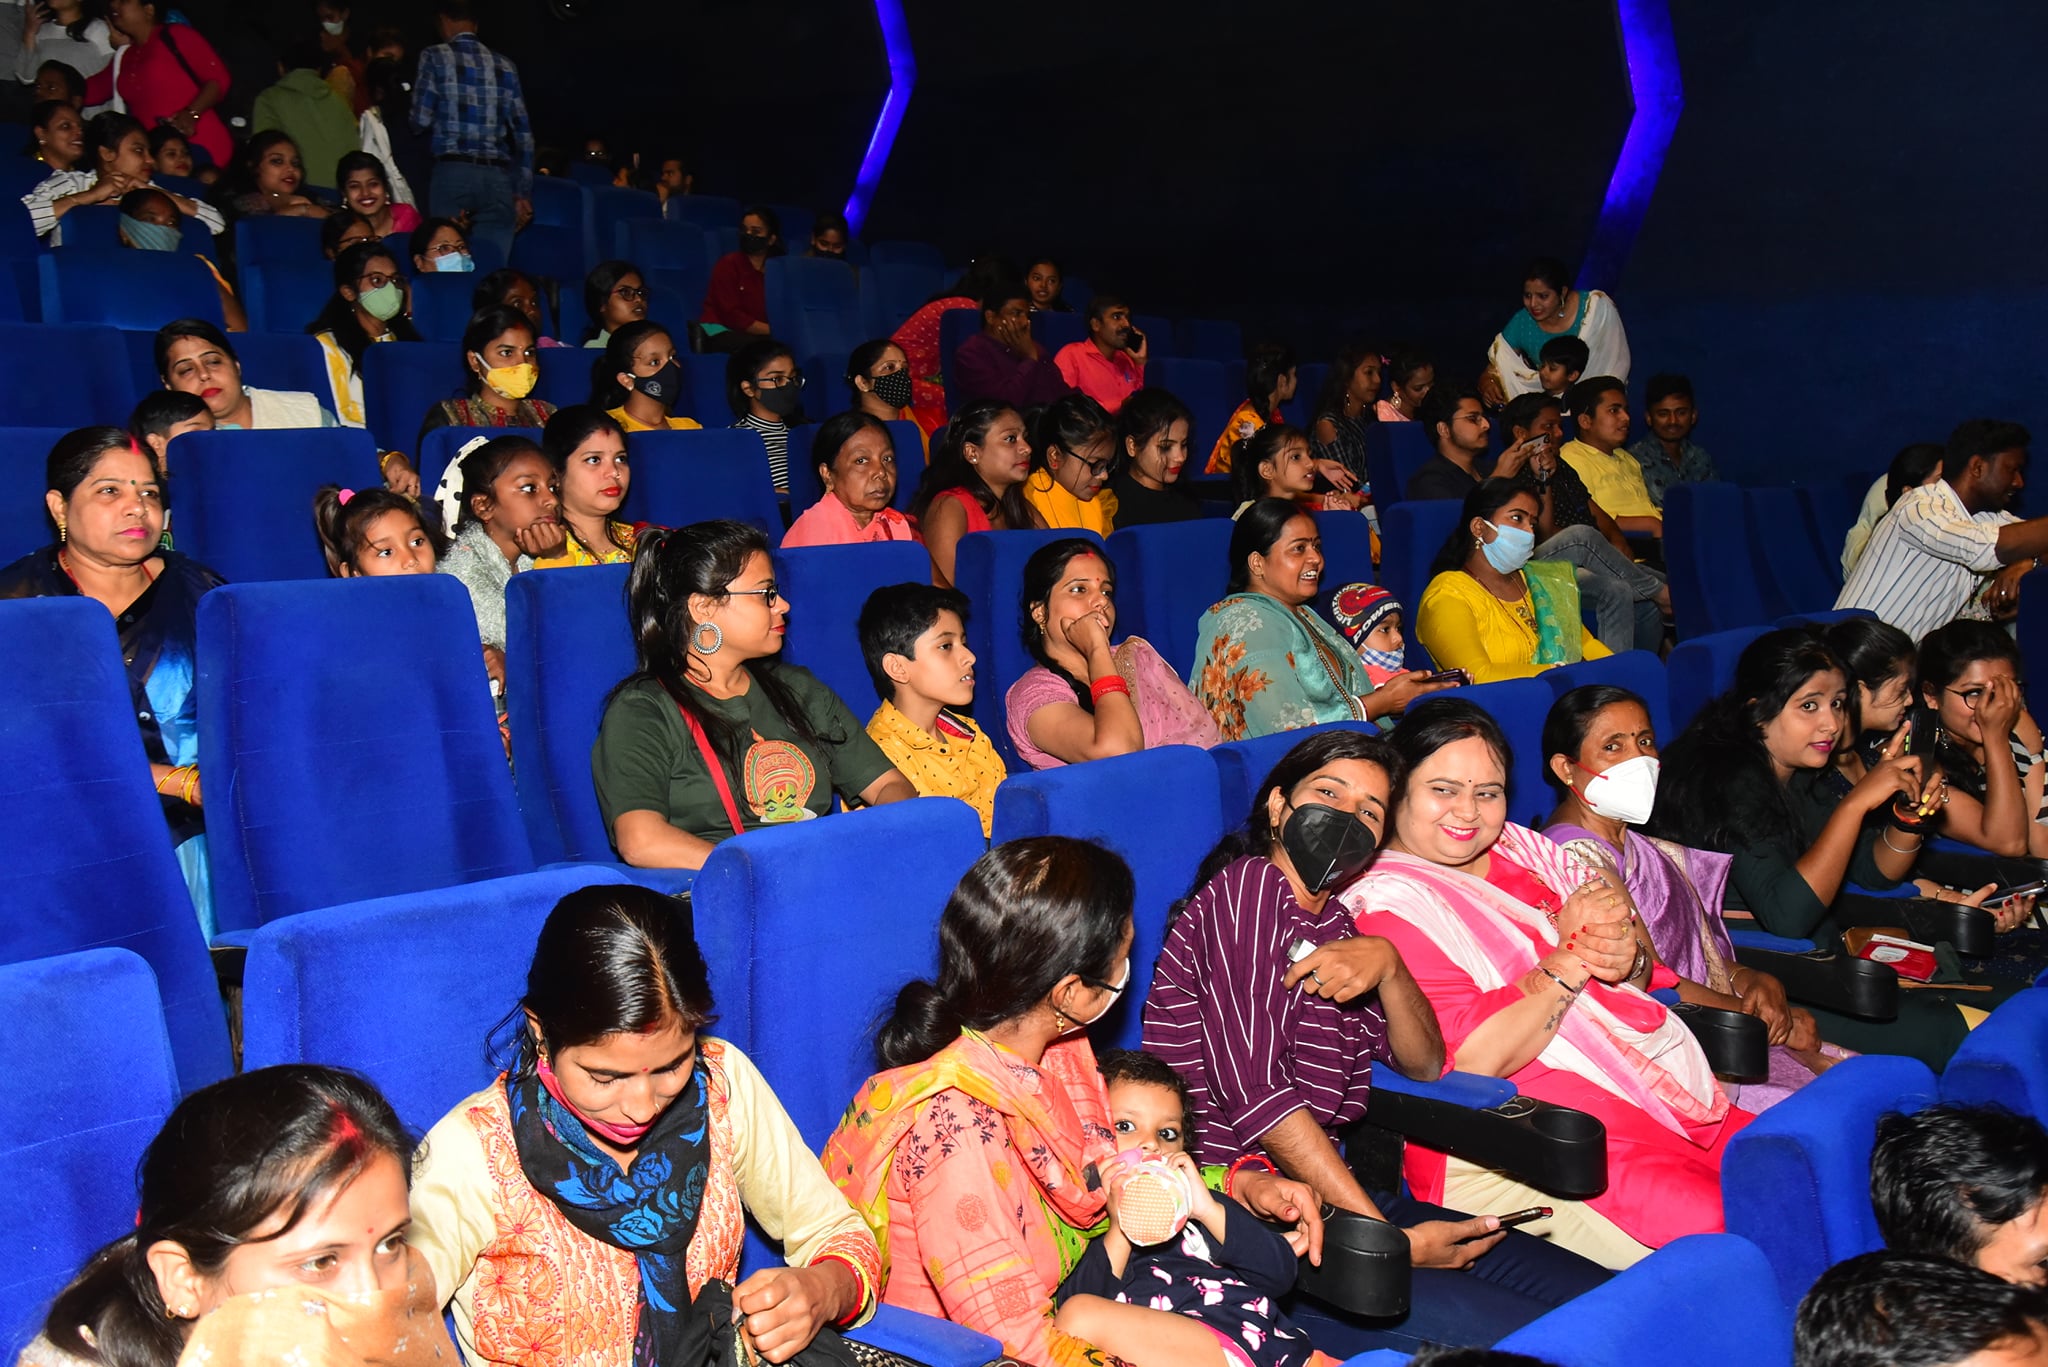 Thousands of spectators came to watch the film